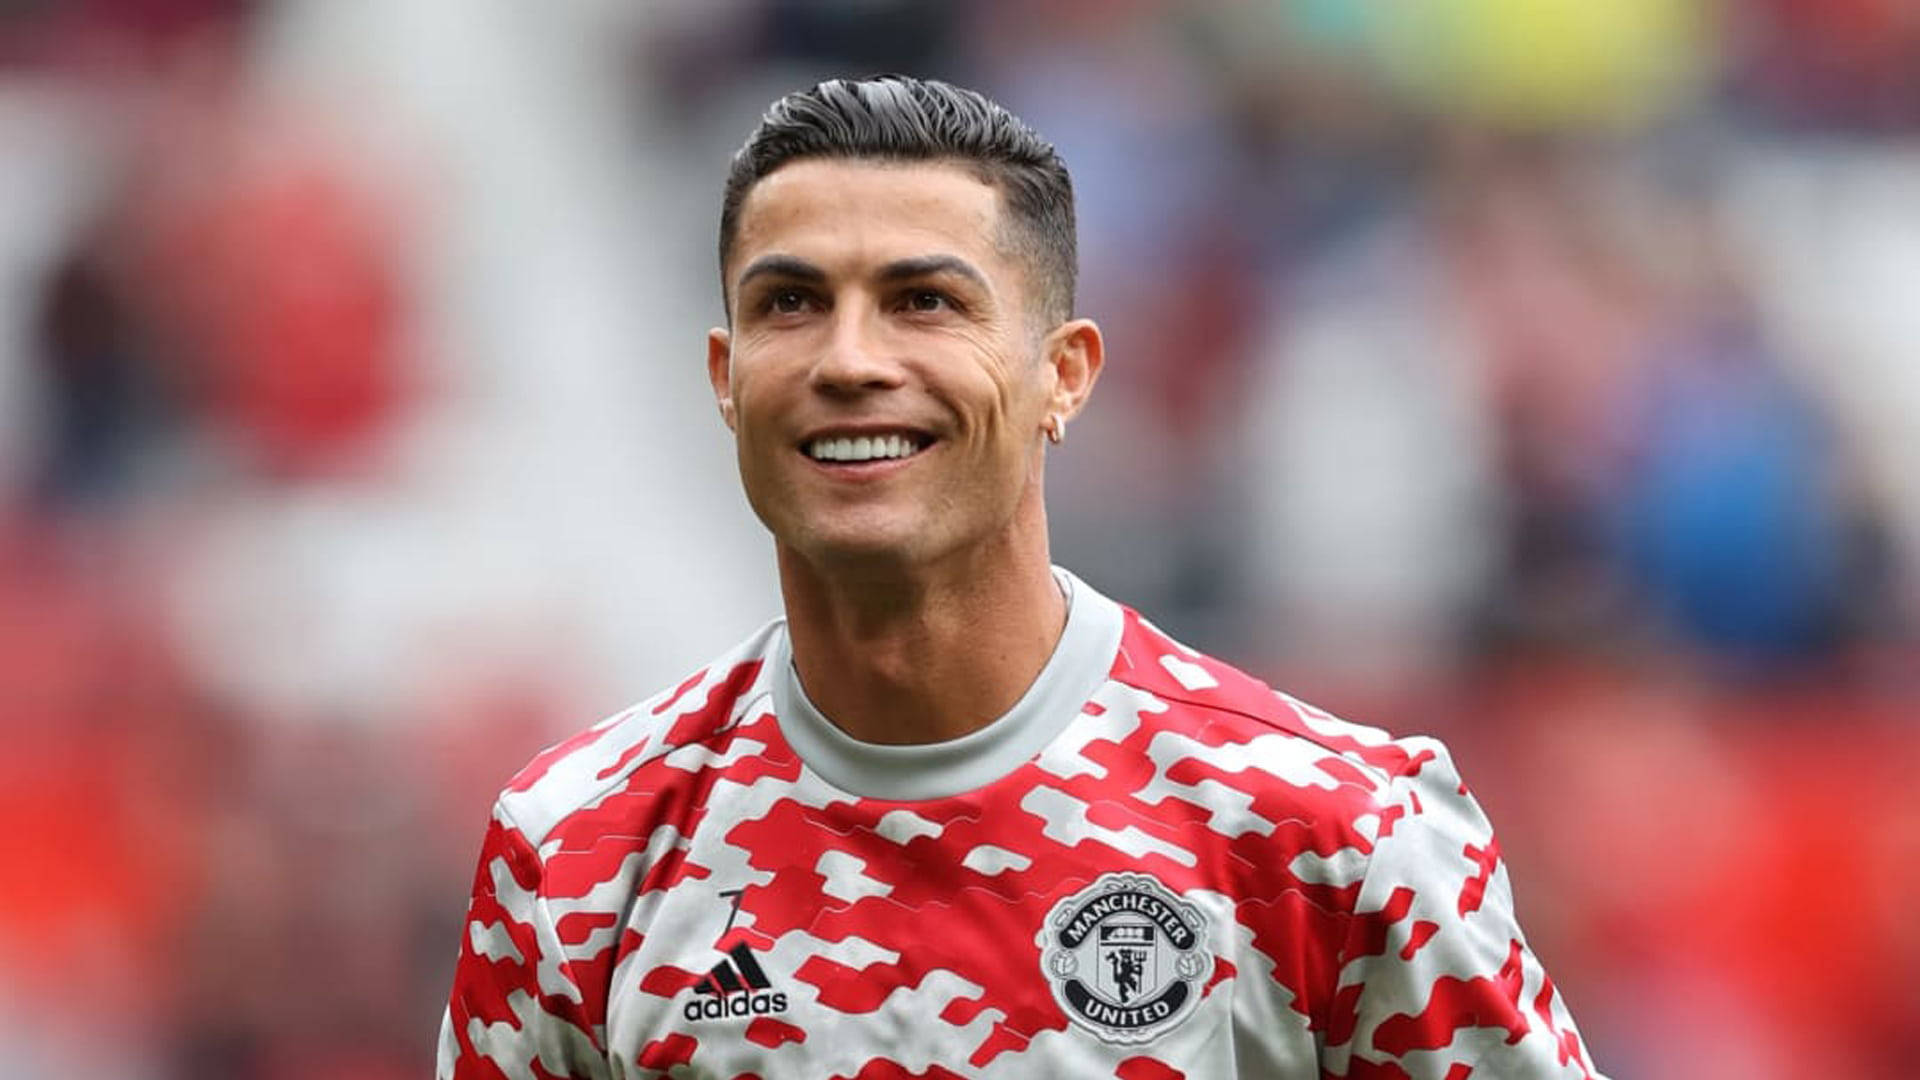 Free Cristiano Ronaldo Manchester United Wallpaper Downloads, [100+]  Cristiano Ronaldo Manchester United Wallpapers for FREE 